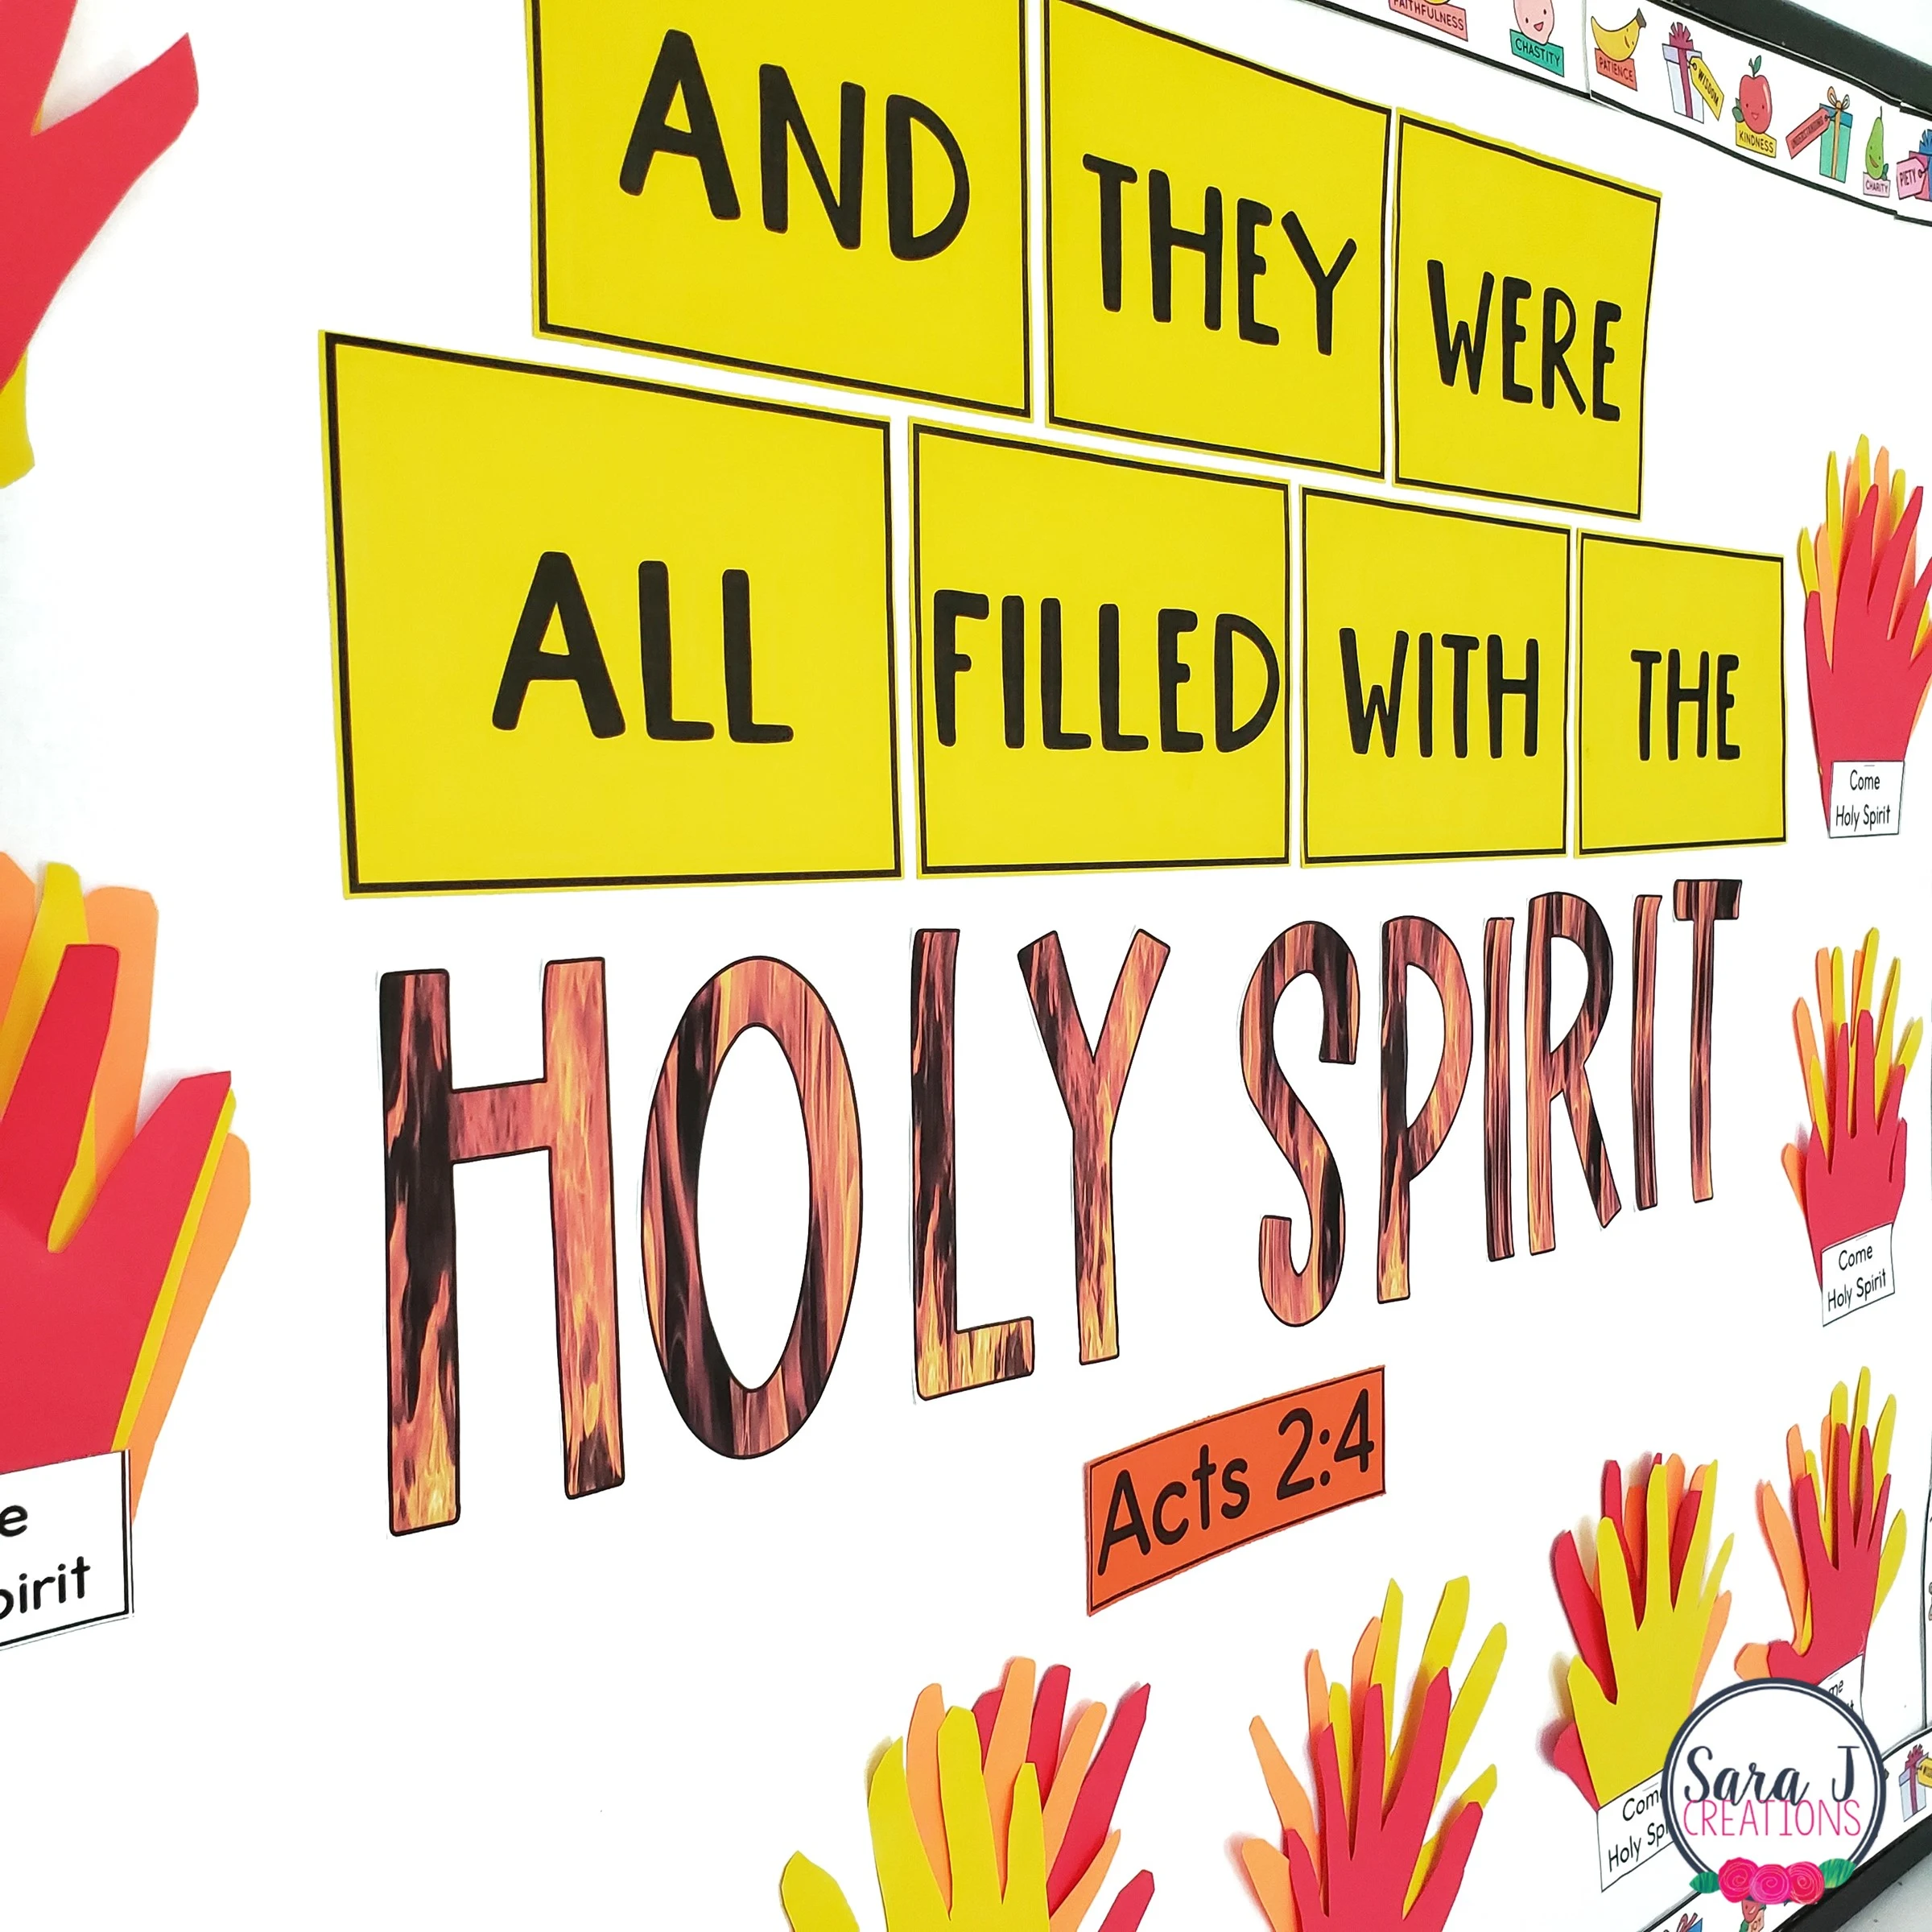 Filled with the Holy Spirit bulletin board